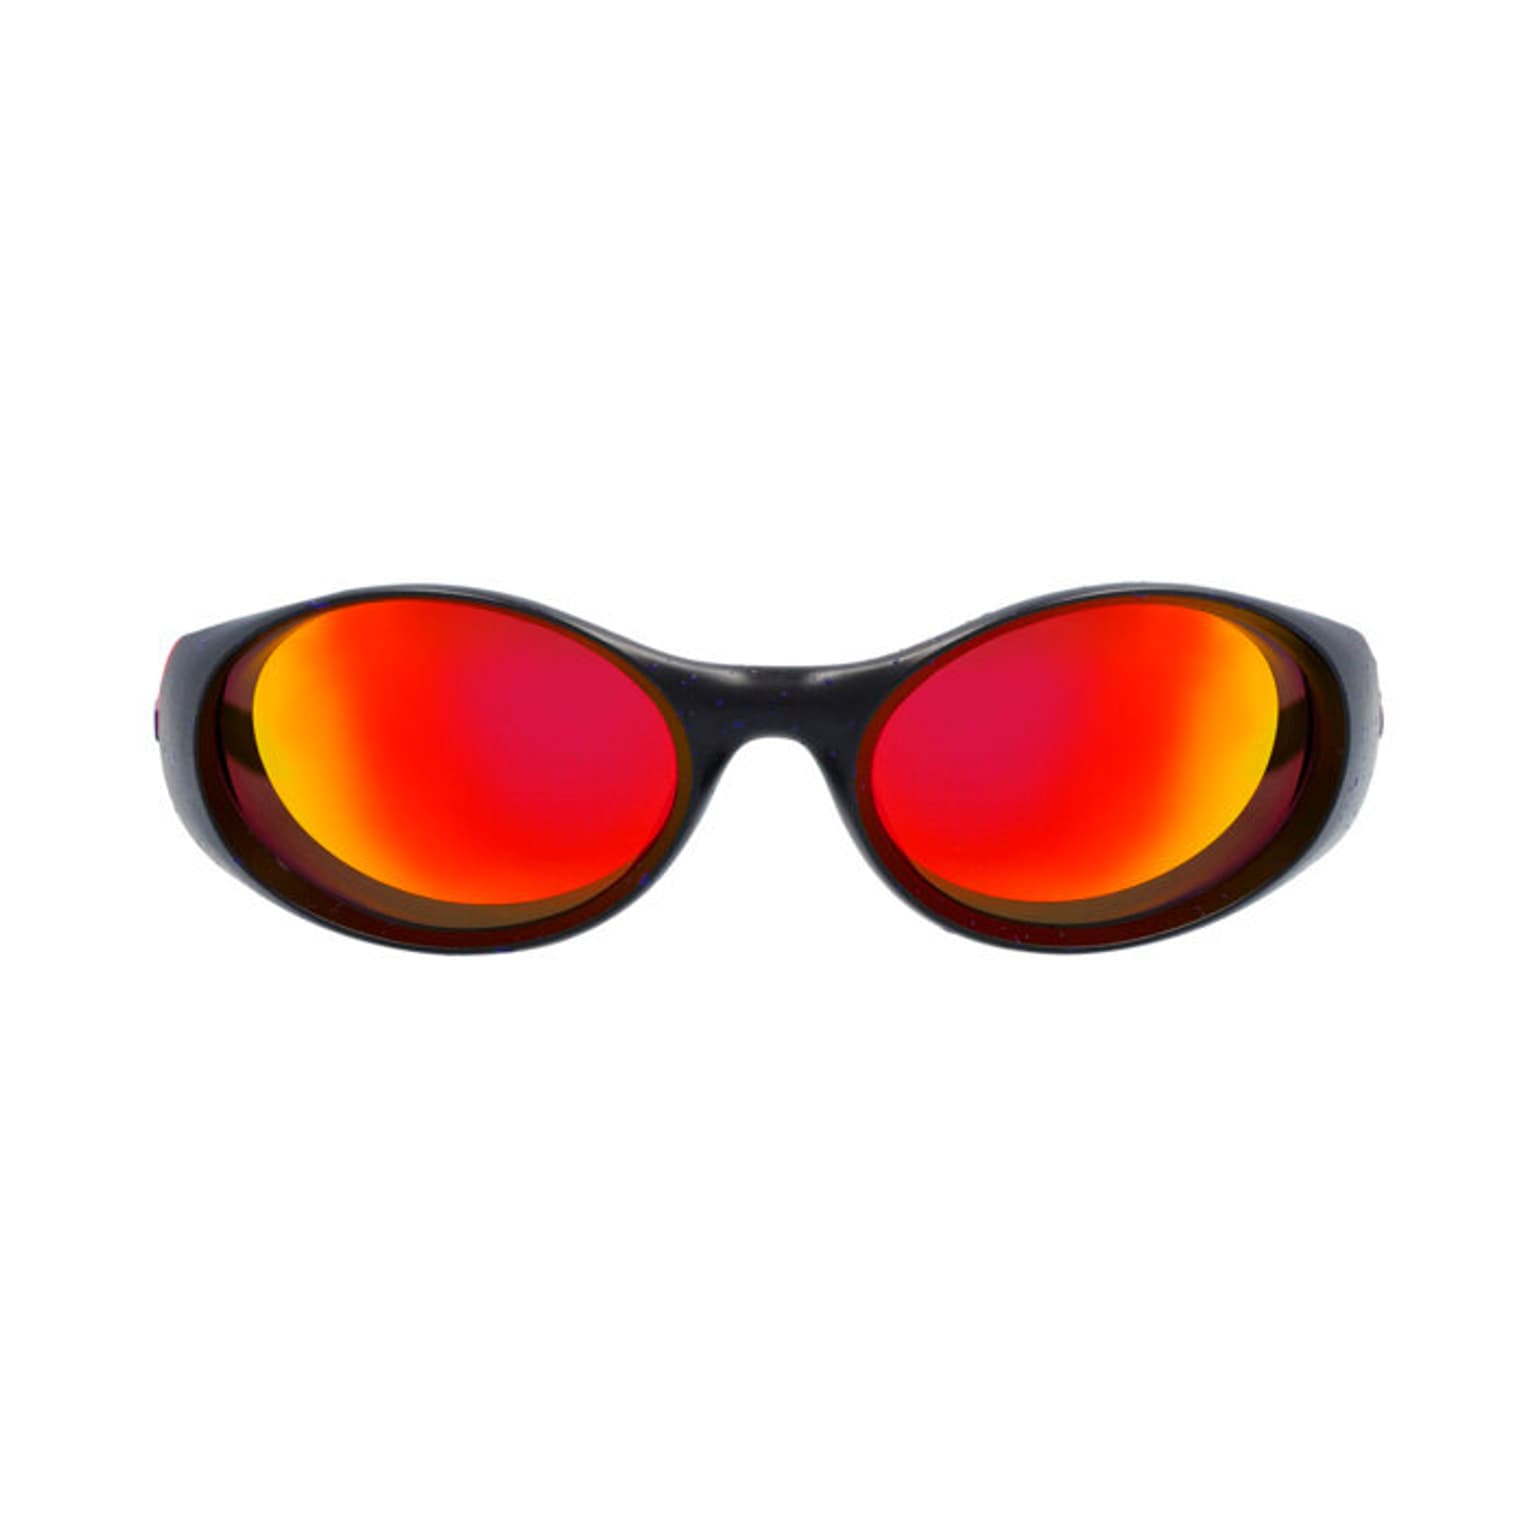 Pit Viper Pit Viper The Slammer The Combustion Sportbrille 2